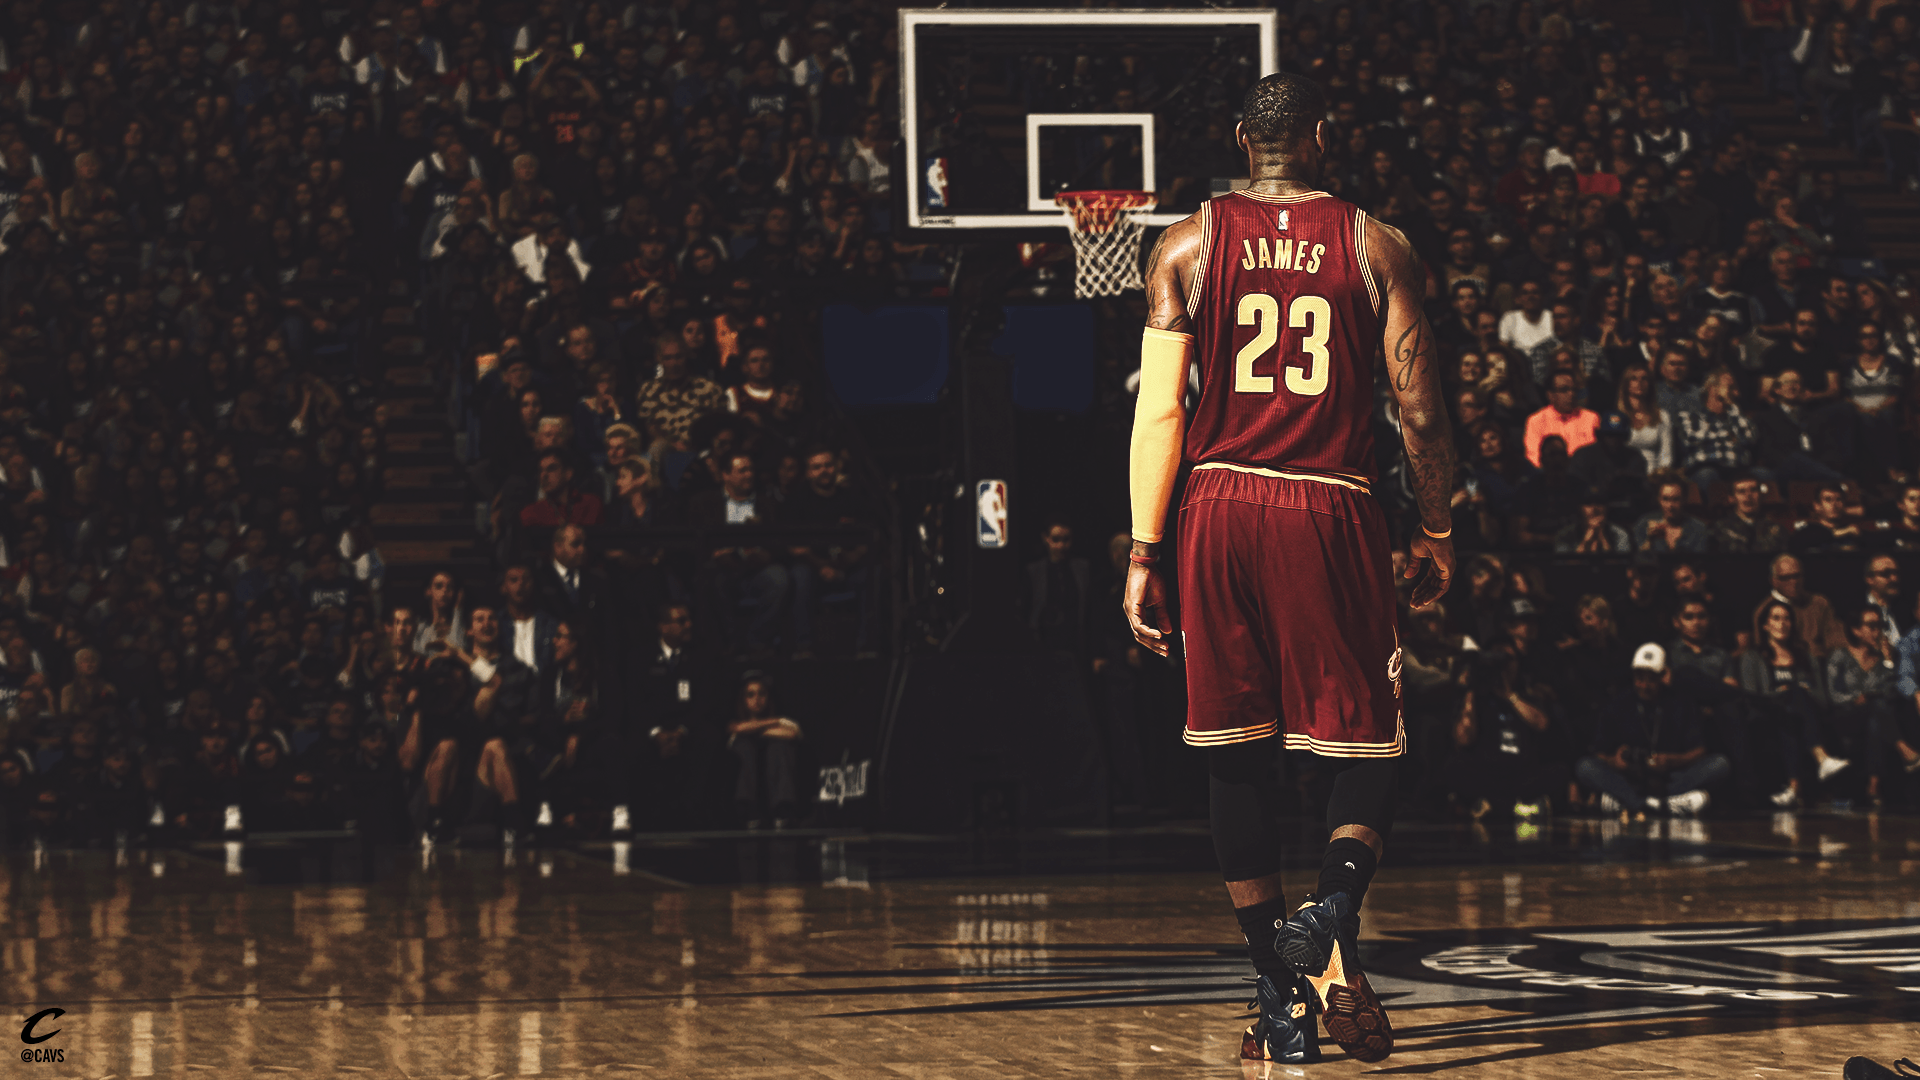 Wallpaper Basketball Picture Of Lebron James